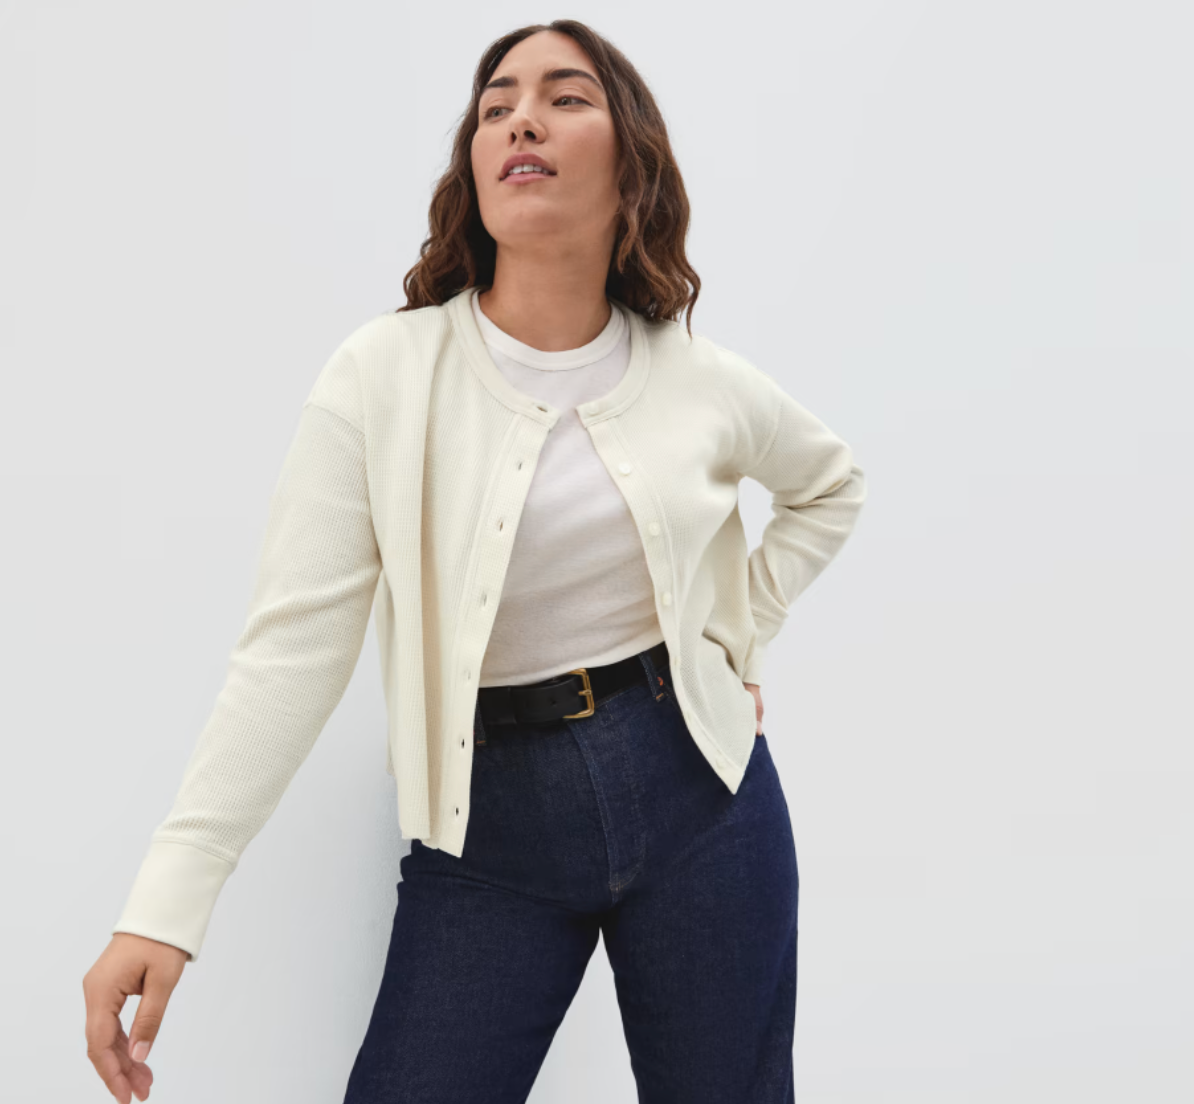 Model is wearing a light cream cardigan over a white top and denim jeans